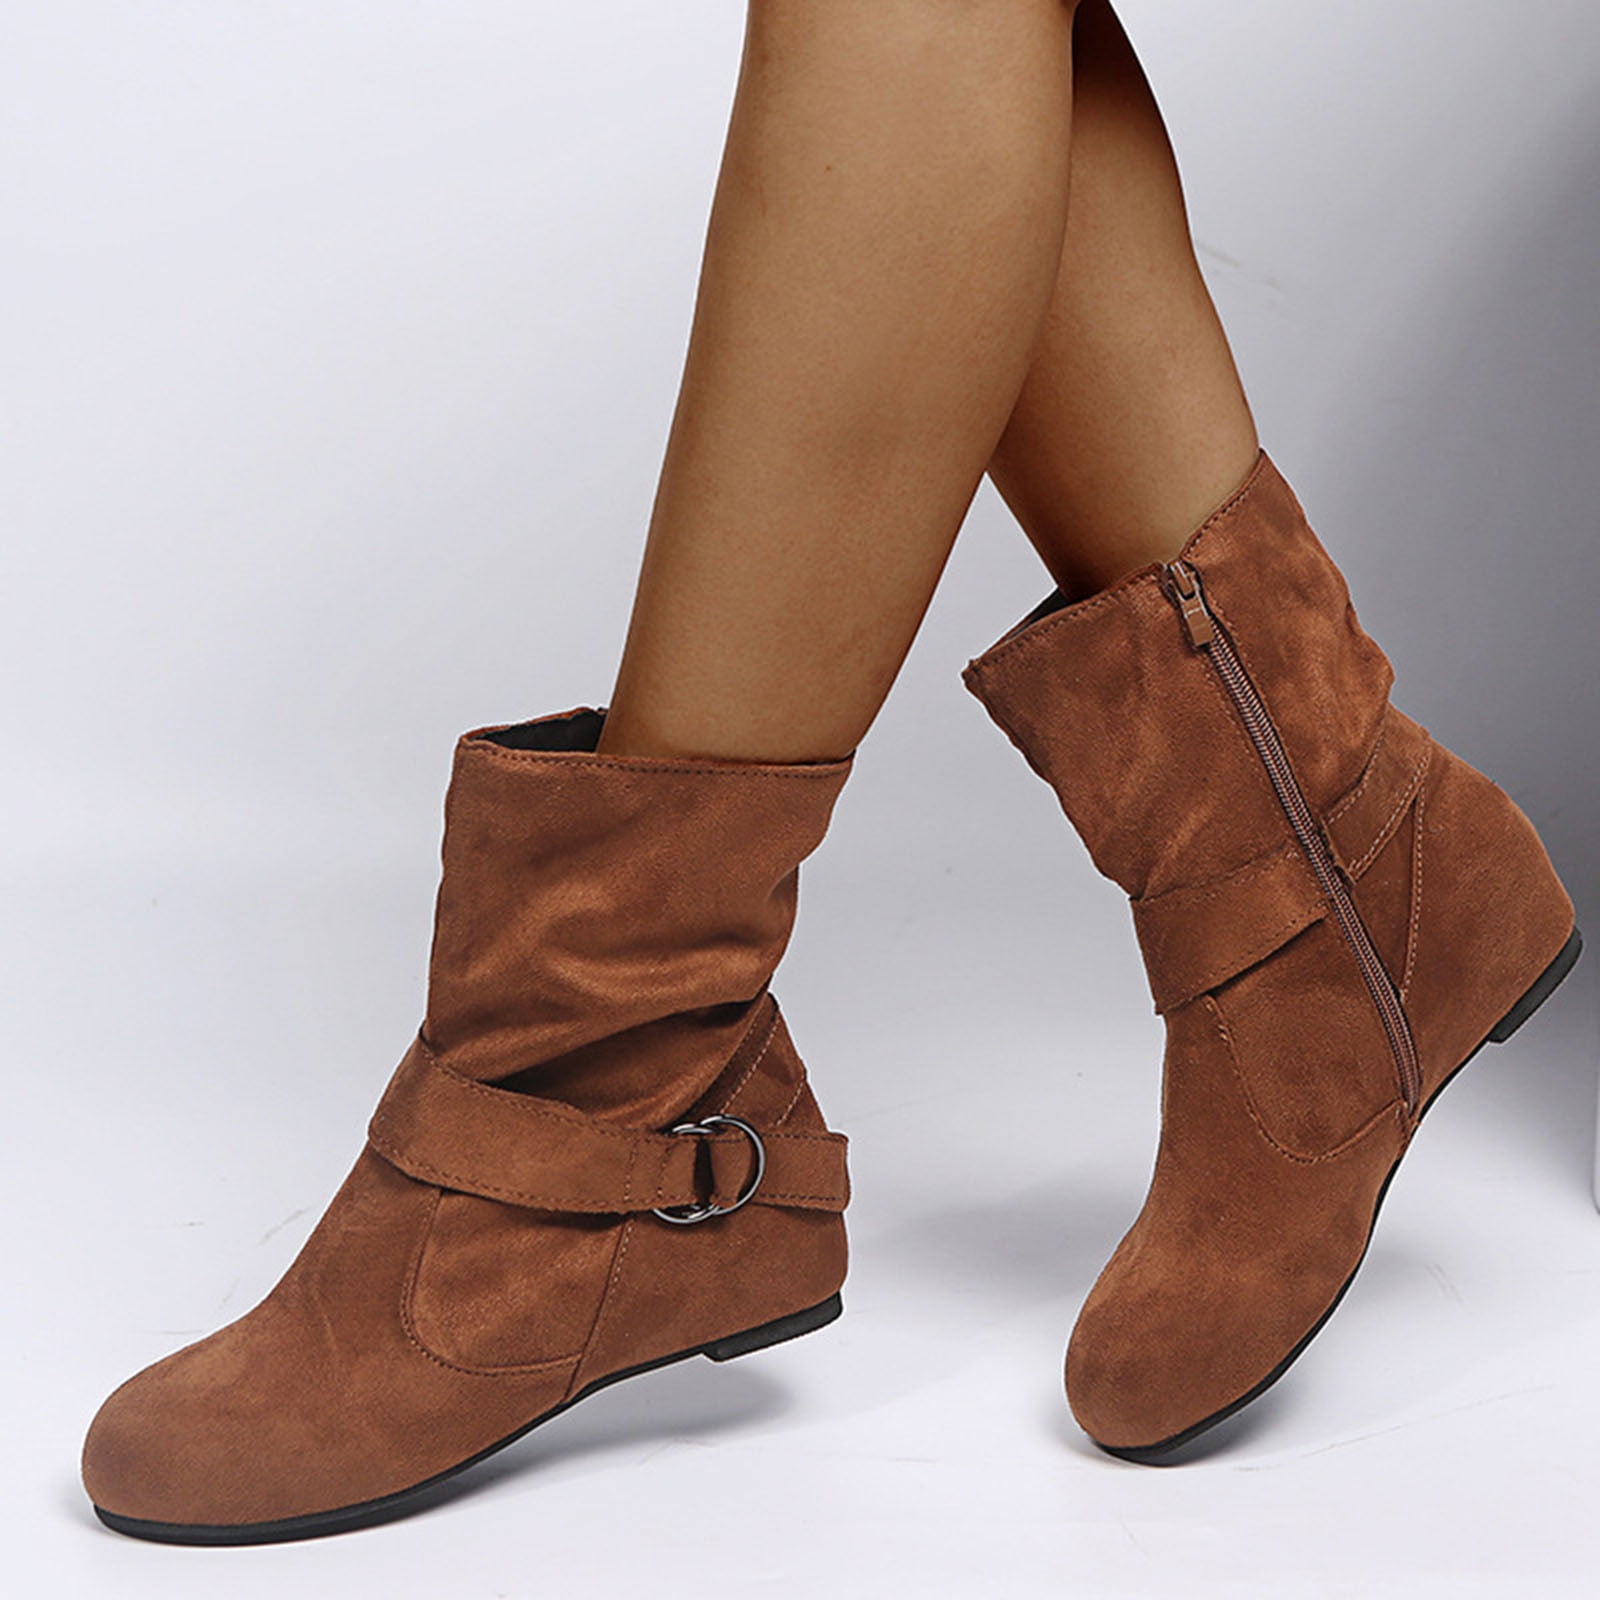 Call It Spring Ciel Mid-calf high heel boots - Stiletto | Kingsway Mall